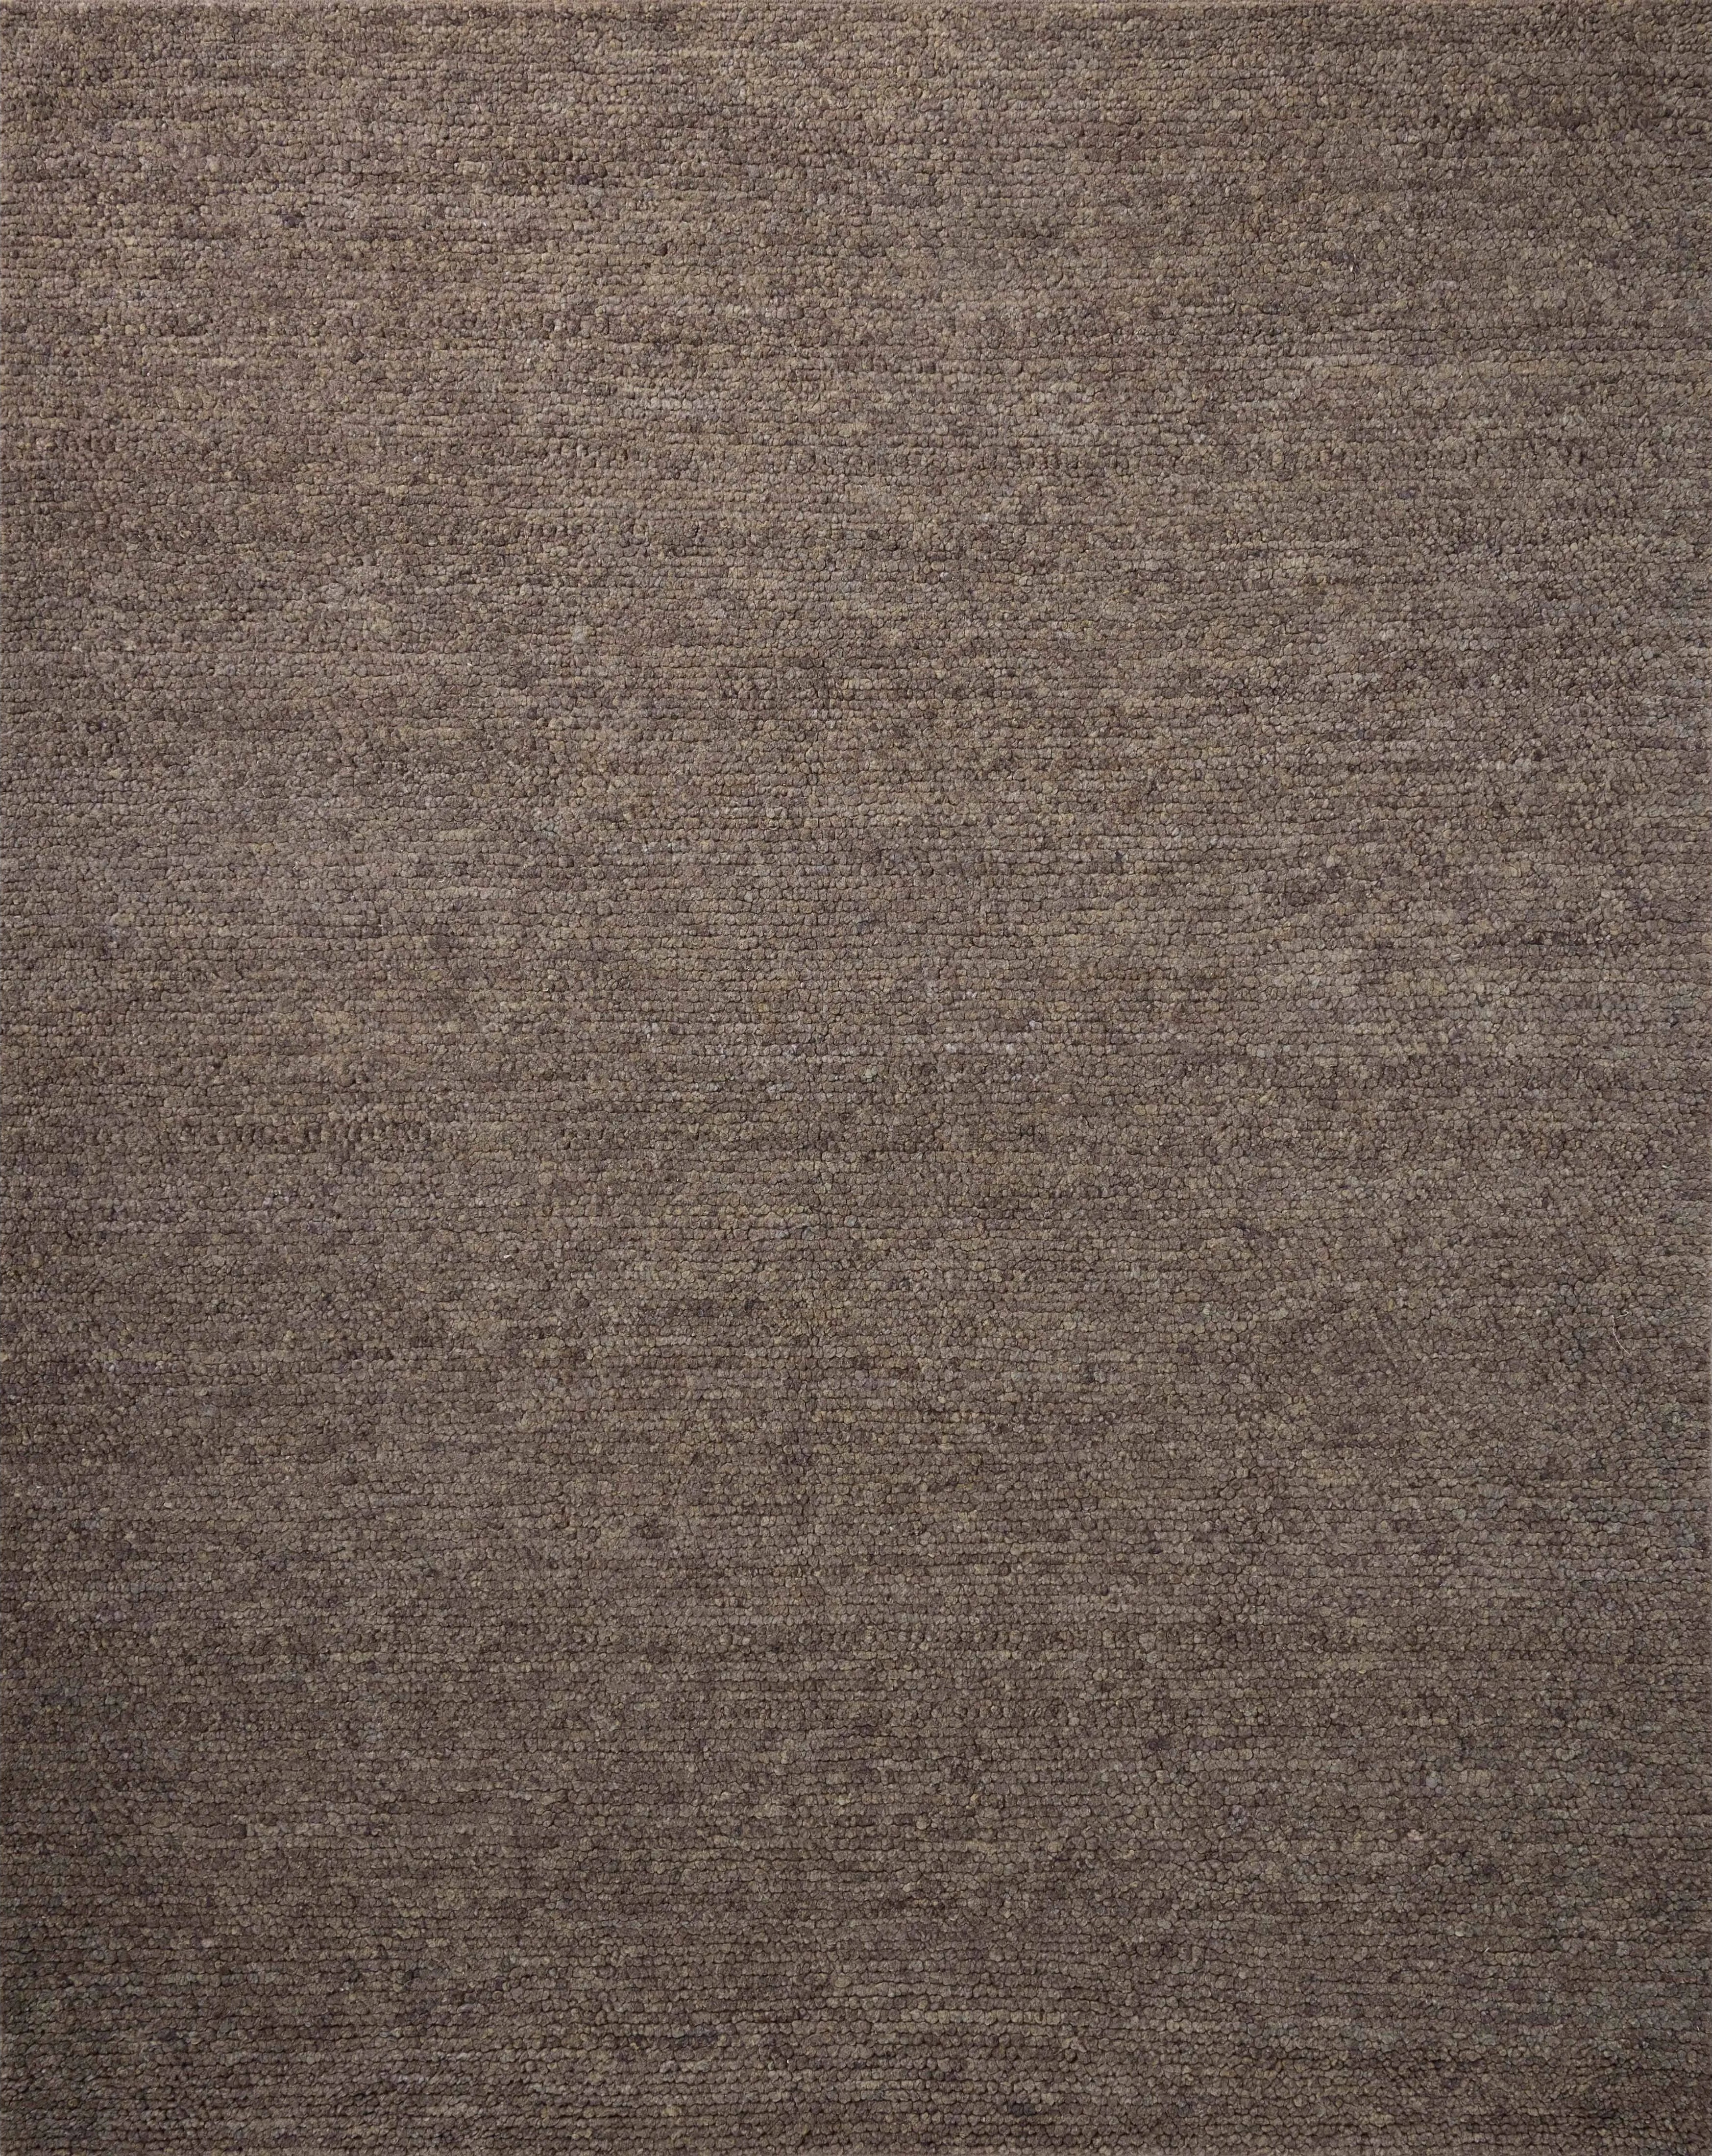 With versatile earth tones and a chunky, hand-knotted texture resembling tiny pebbles, the Frida Graphite Rug by Brigette Romanek x Loloi can ground any room with a sense of elevated ease. Each area rug features a subtle nuance in color variation due to the handmade nature of its construction and has a pleasantly nubby softness underfoot. Amethyst Home provides interior design, new home construction design consulting, vintage area rugs, and lighting in the Portland metro area.